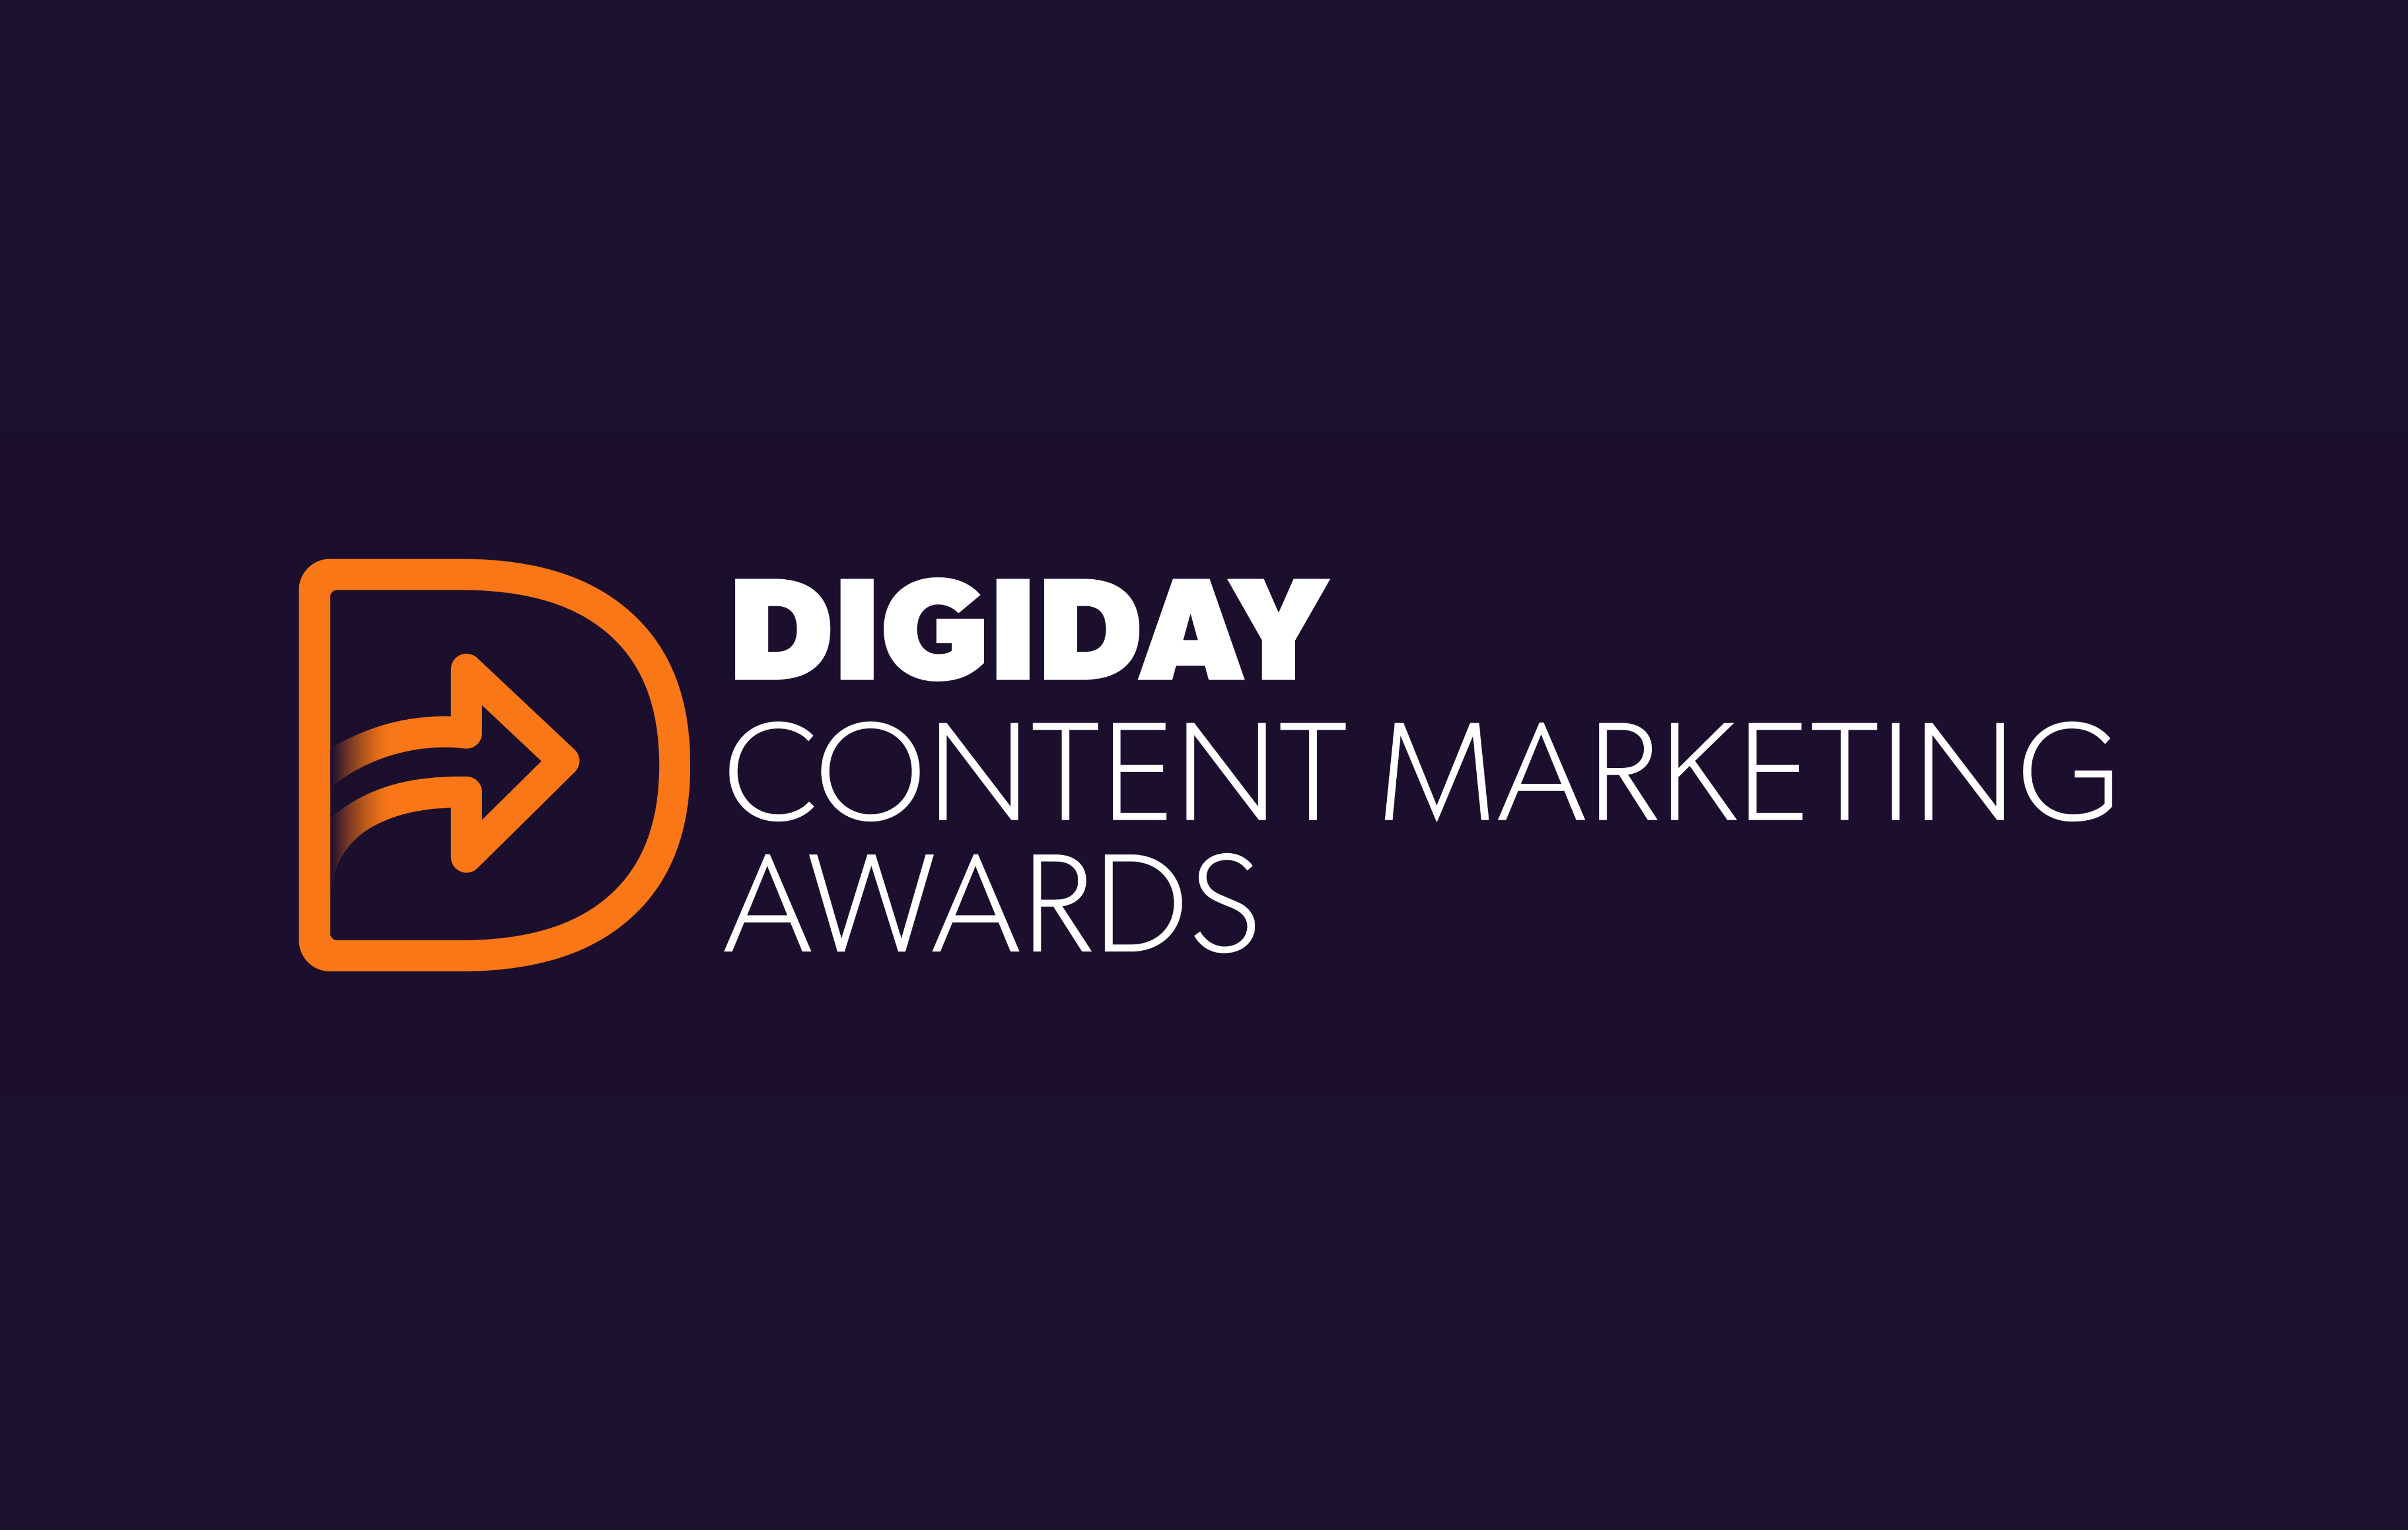 Amazon Ads, Reddit and MTV are 2024 Digiday Content Marketing Award finalists